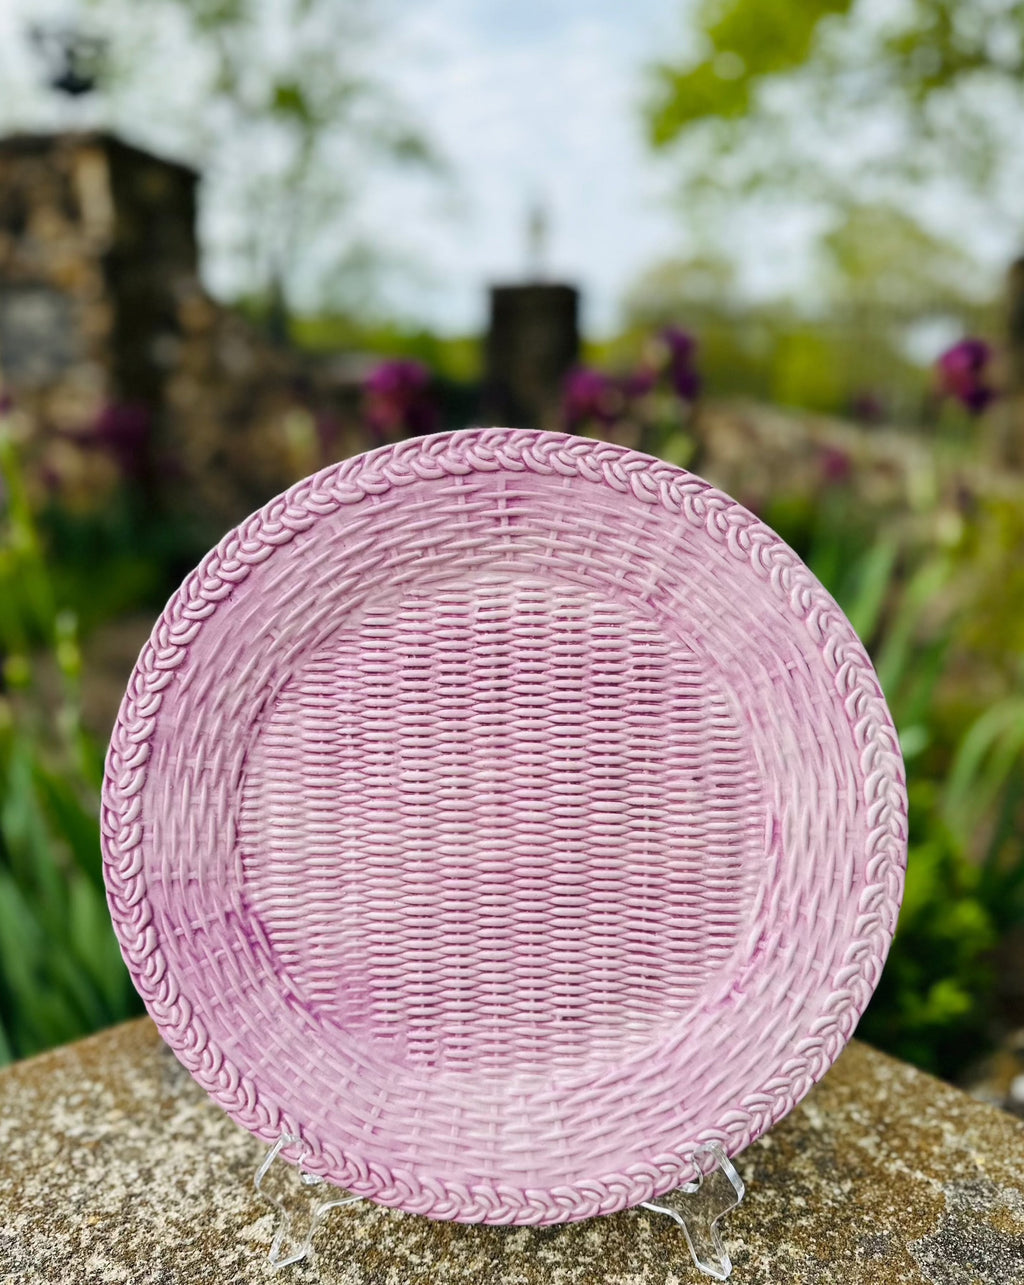 Ceramic Wicker Lilac Charger Plate - New Color!